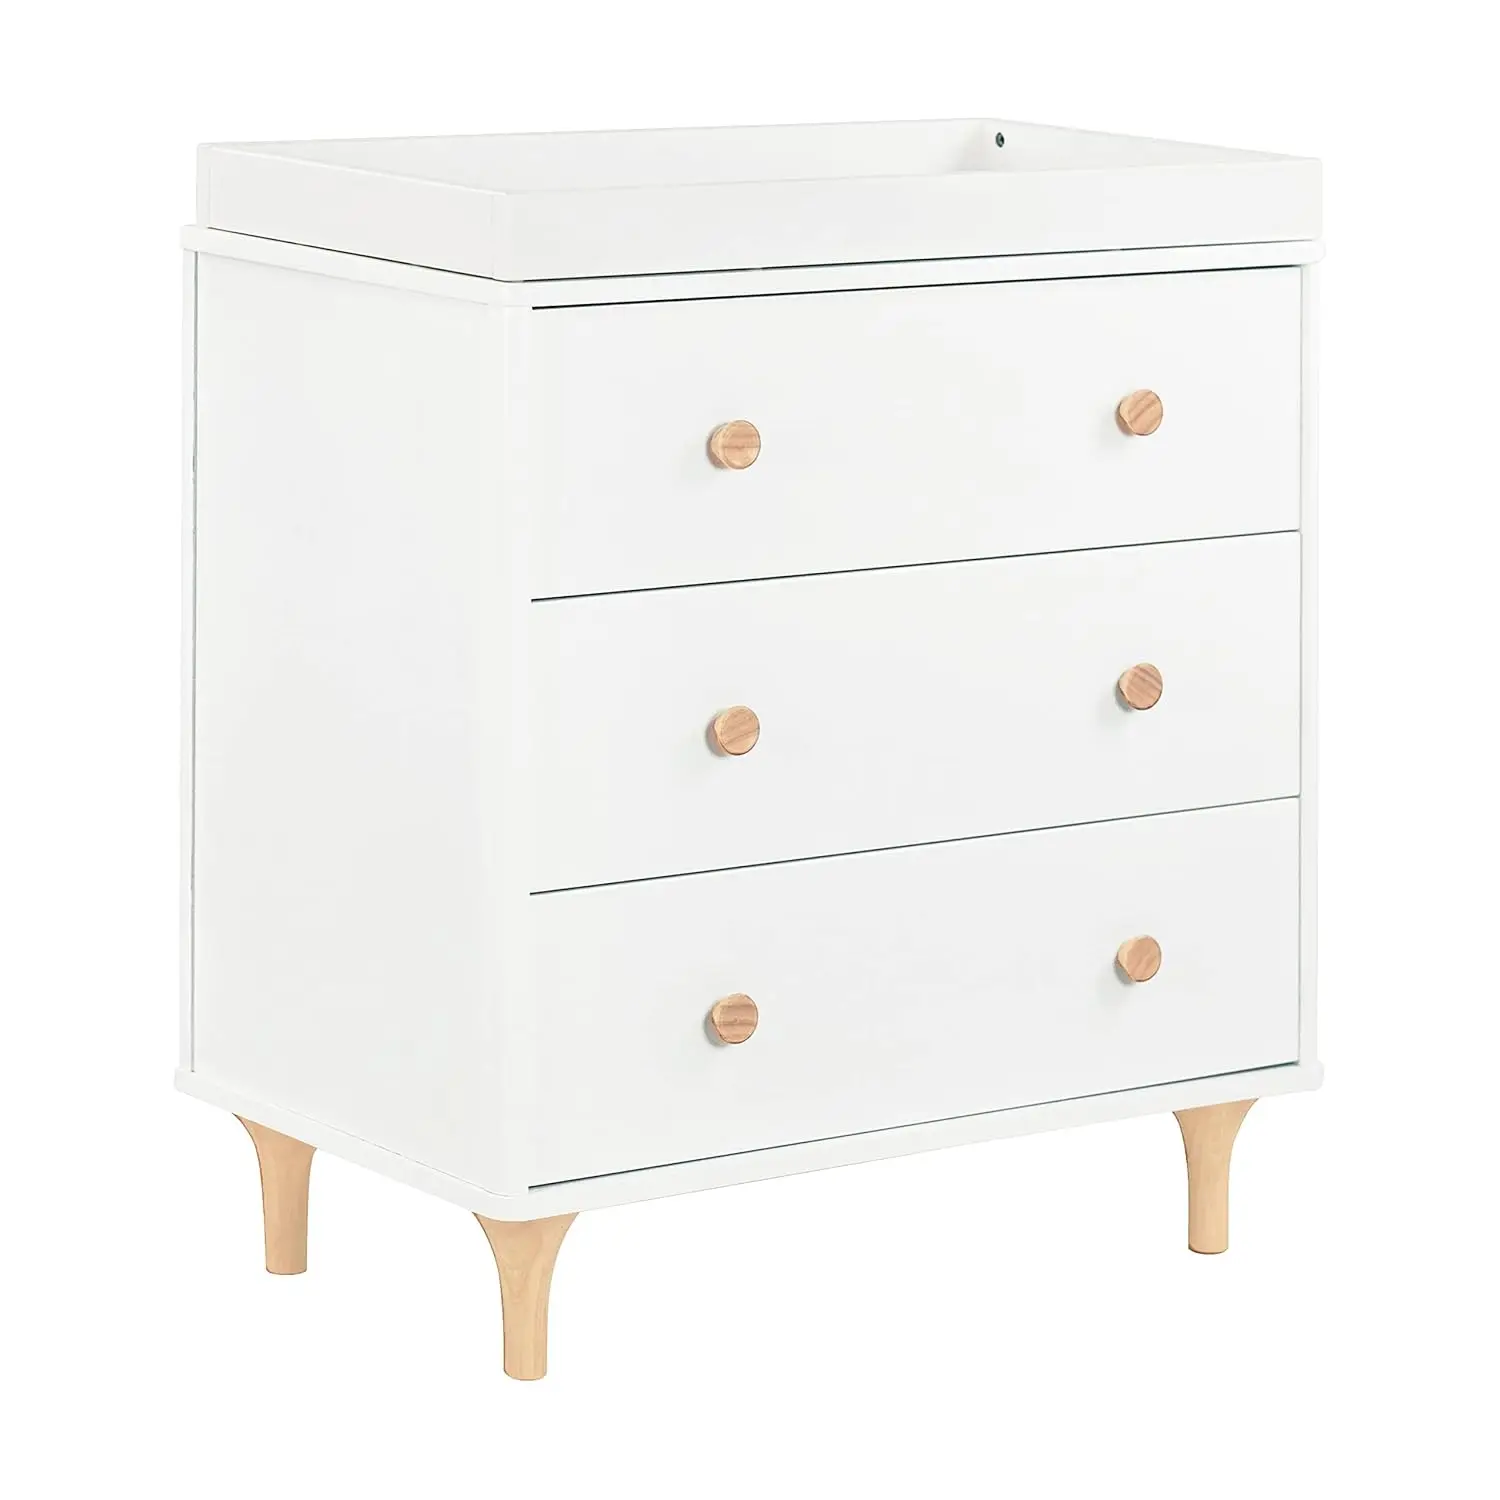 

Babyletto Lolly 3-Drawer Changer Dresser with Removable Changing Tray in White and Natural, Greenguard Gold Certified